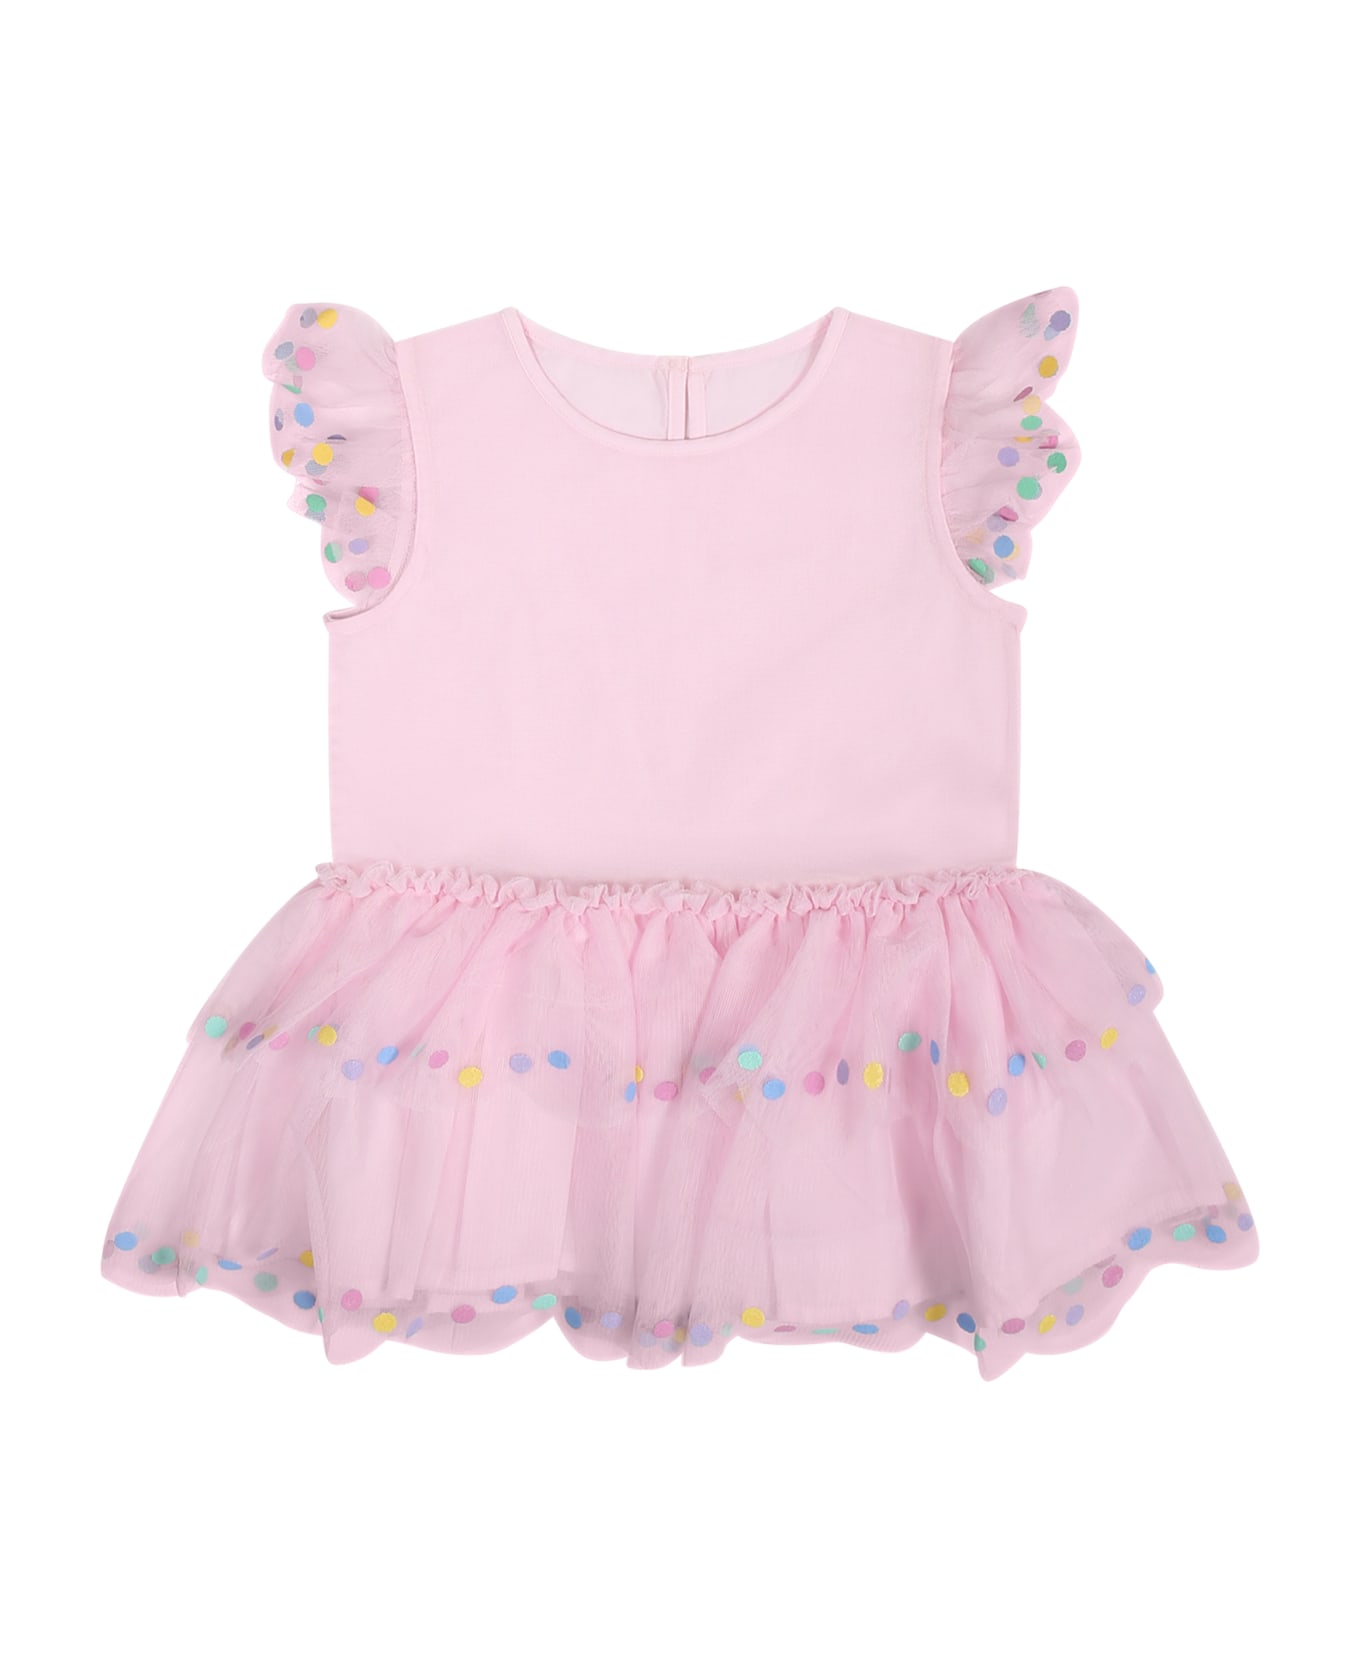 Stella McCartney Kids Pink Dress For Baby Girl With Polka Dots - Pink